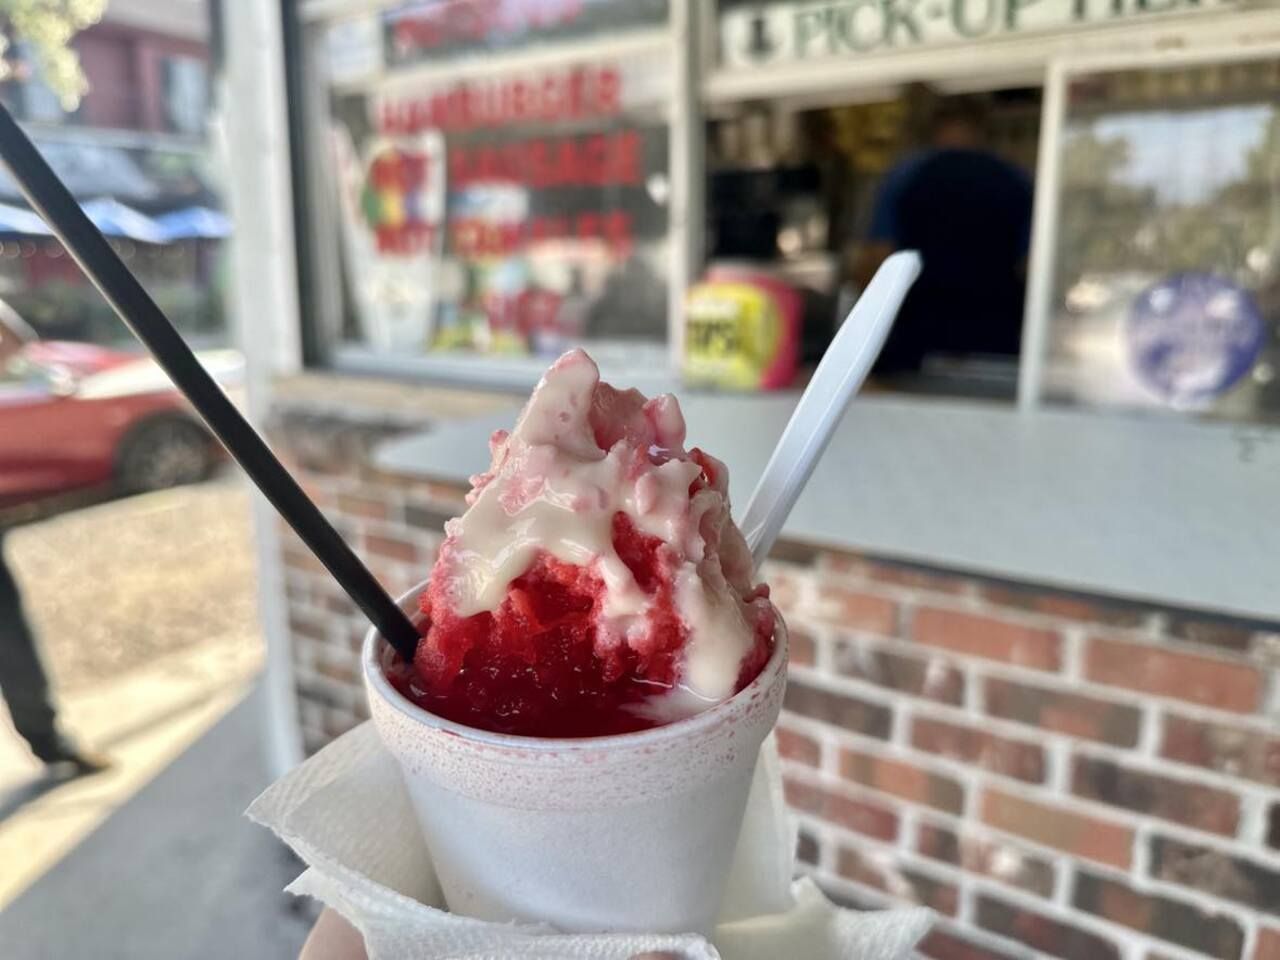 Photo shows a strawberry snoball with cream